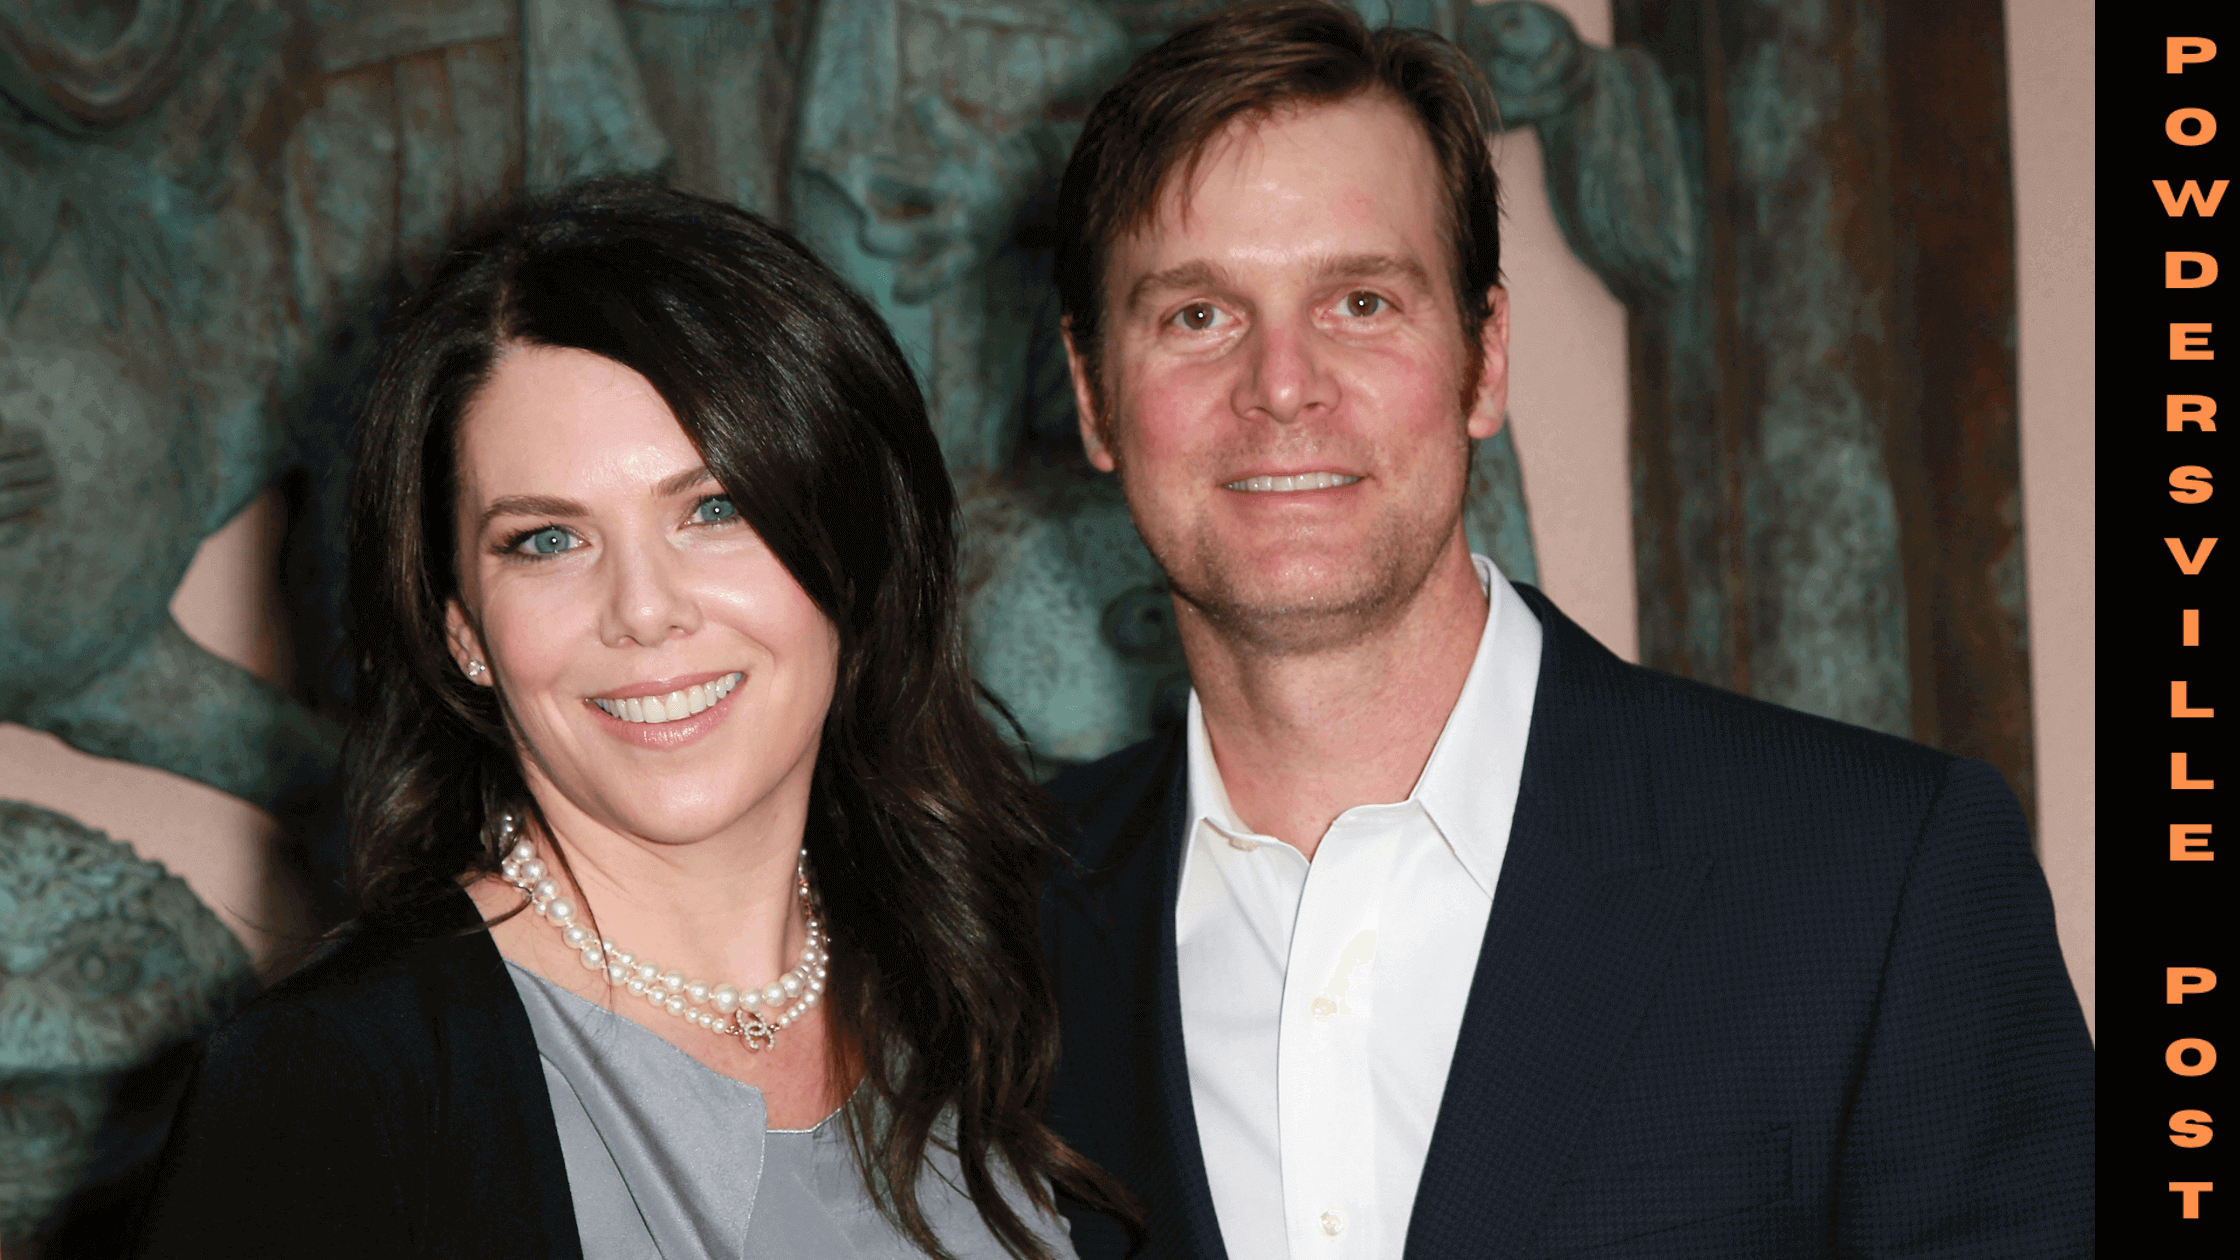 Lauren Graham and Peter Krause Started Dating While They Appeared Together On Parenthood As Sibling